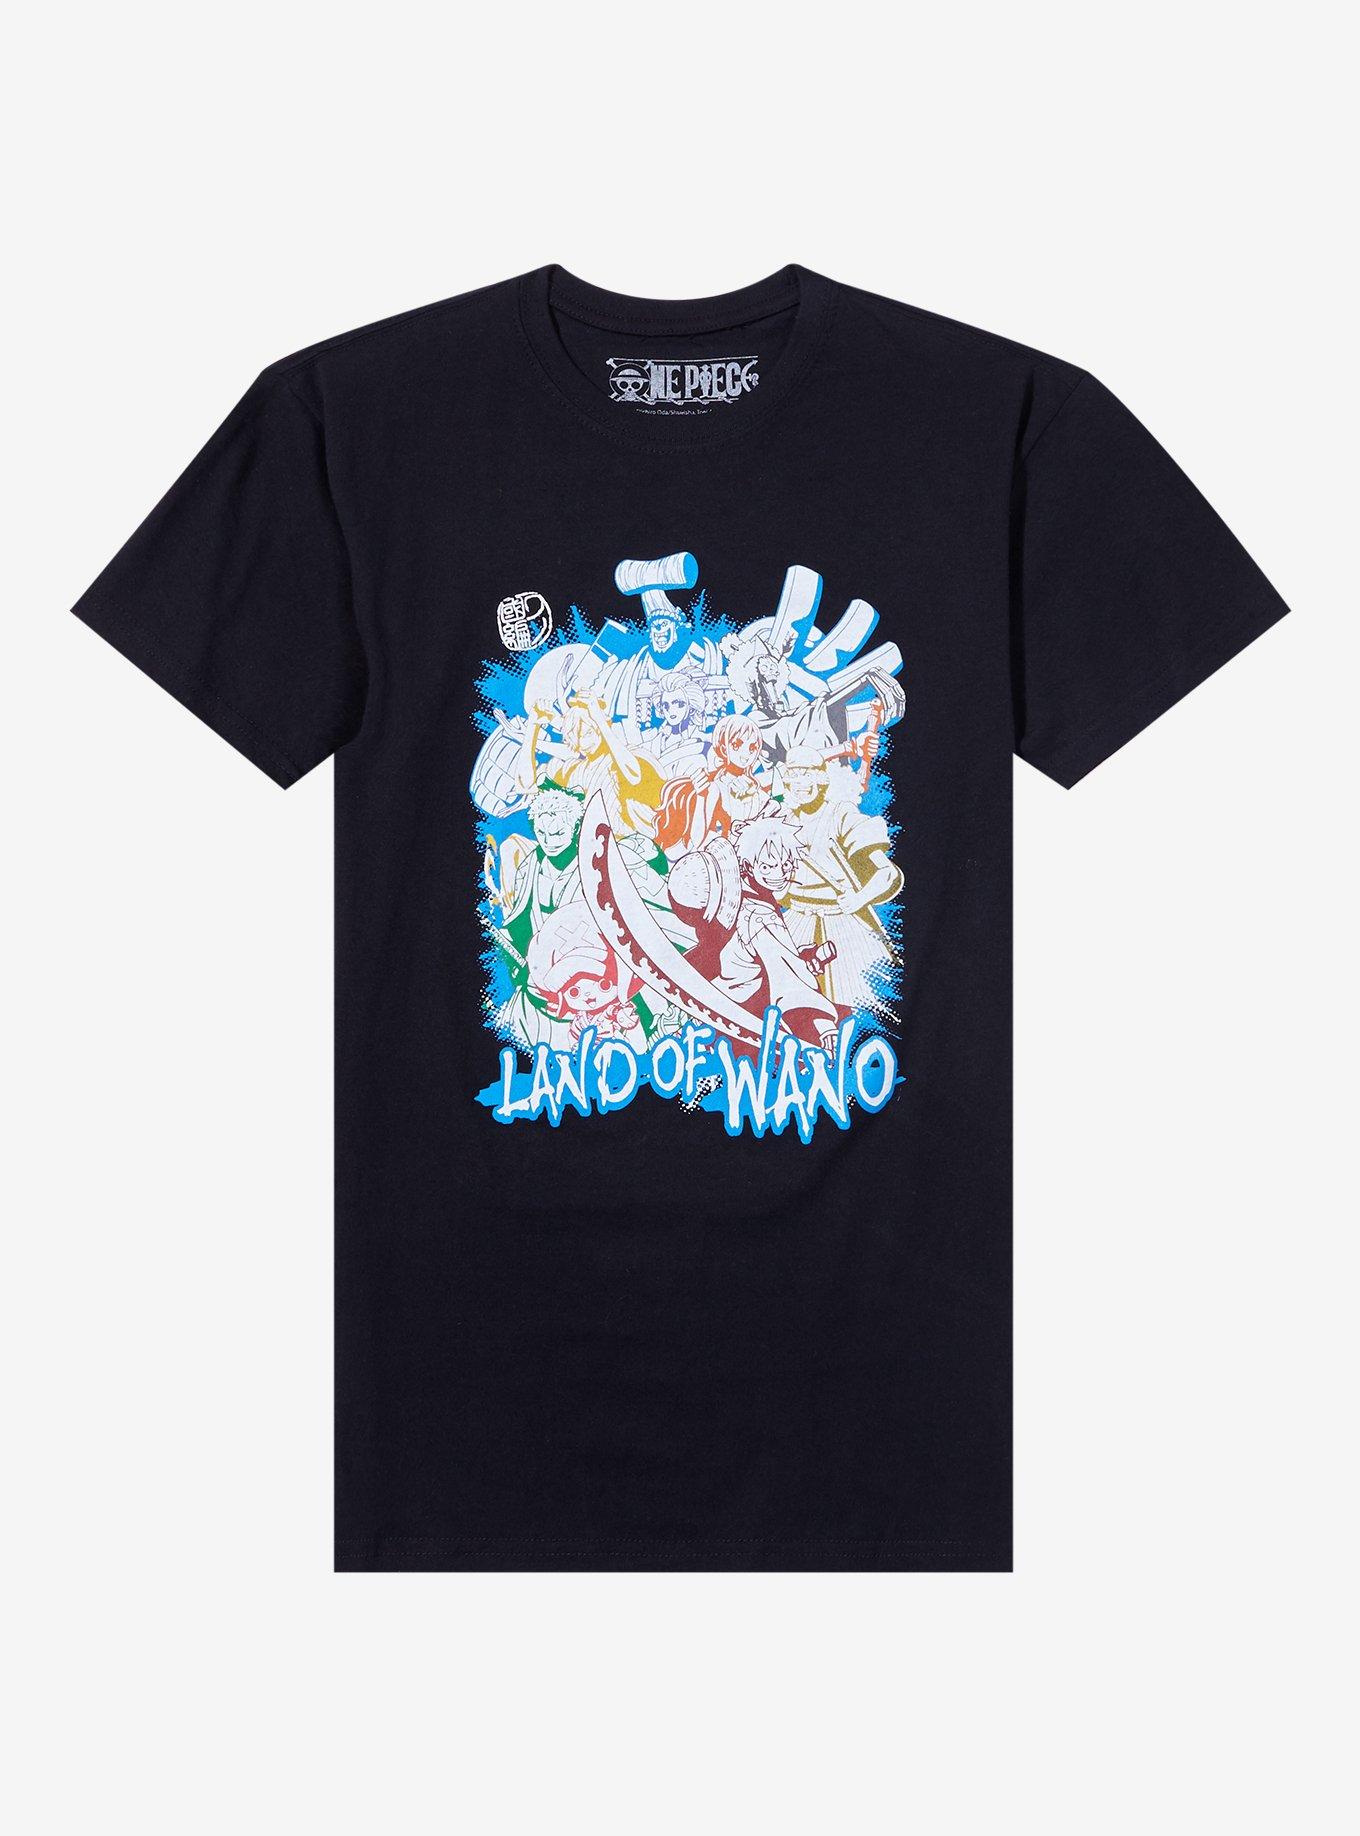 One Piece Land Of Wano Group T-Shirt, BLACK, hi-res